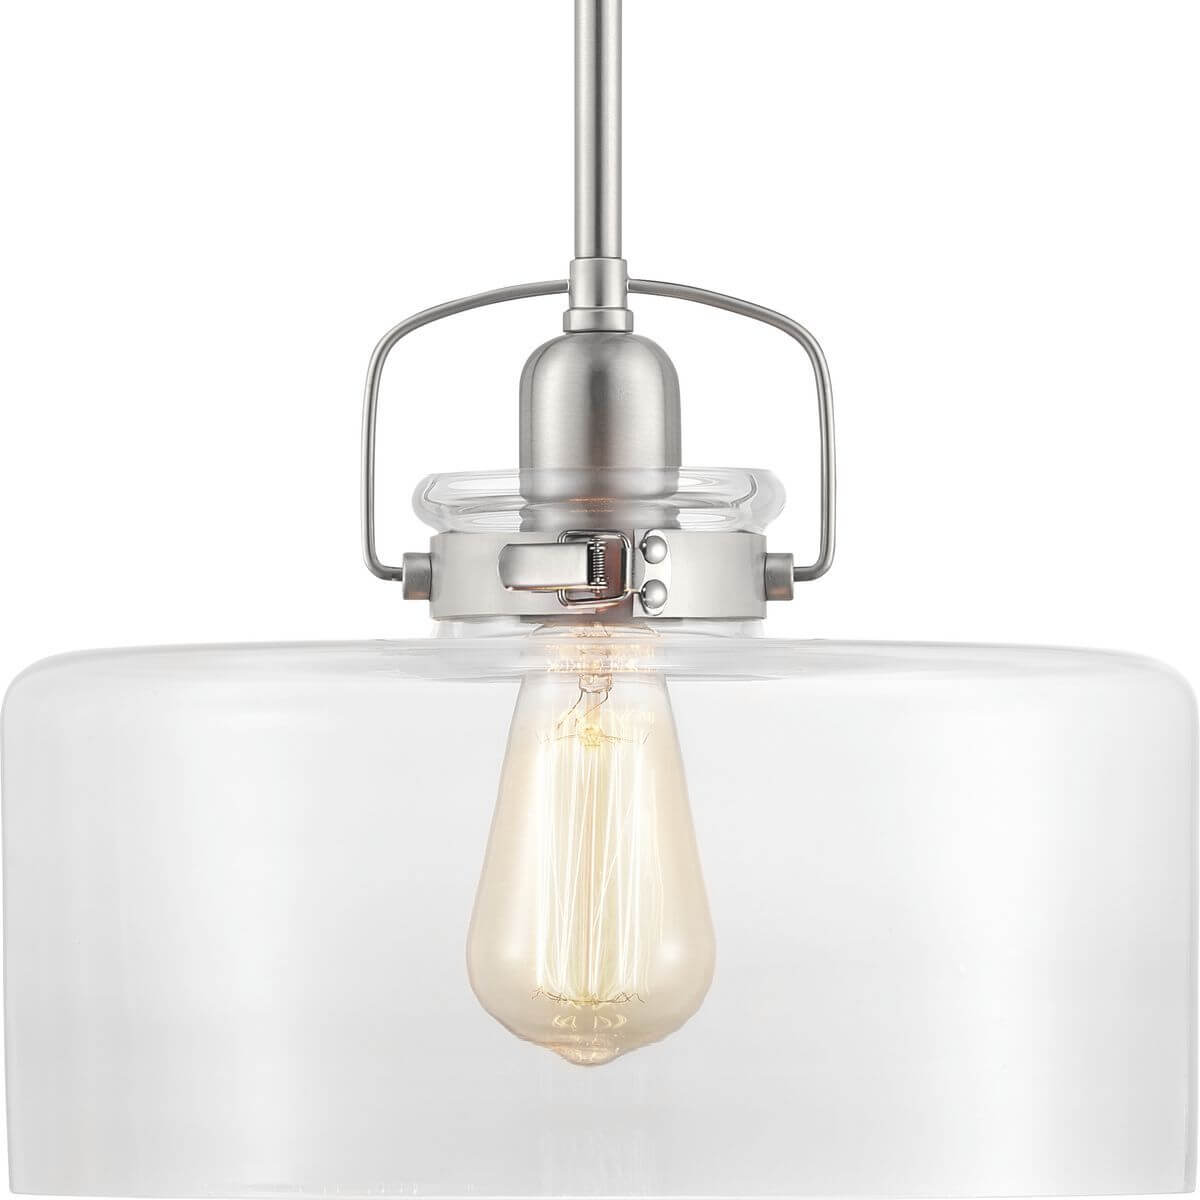 Progress Lighting Calhoun 1 Light 12 inch Pendant in Brushed Nickel with Clear Glass P500152-009